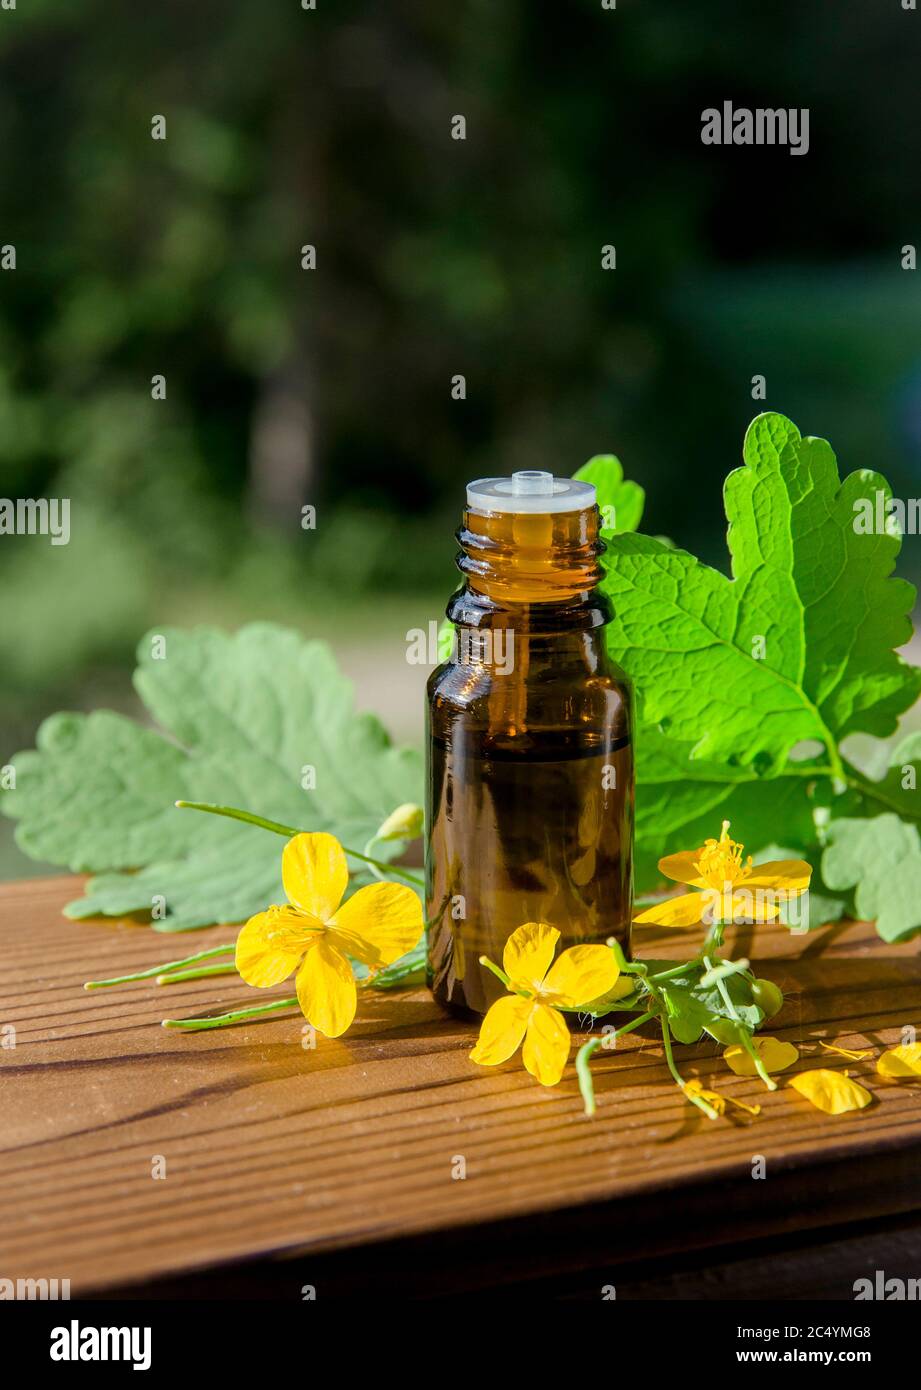 Chelidonium majus tincture in bottle( also known: greater celandine, nipplewort, swallowwort or tetterwort) latex is used for getting rid of warts. Stock Photo